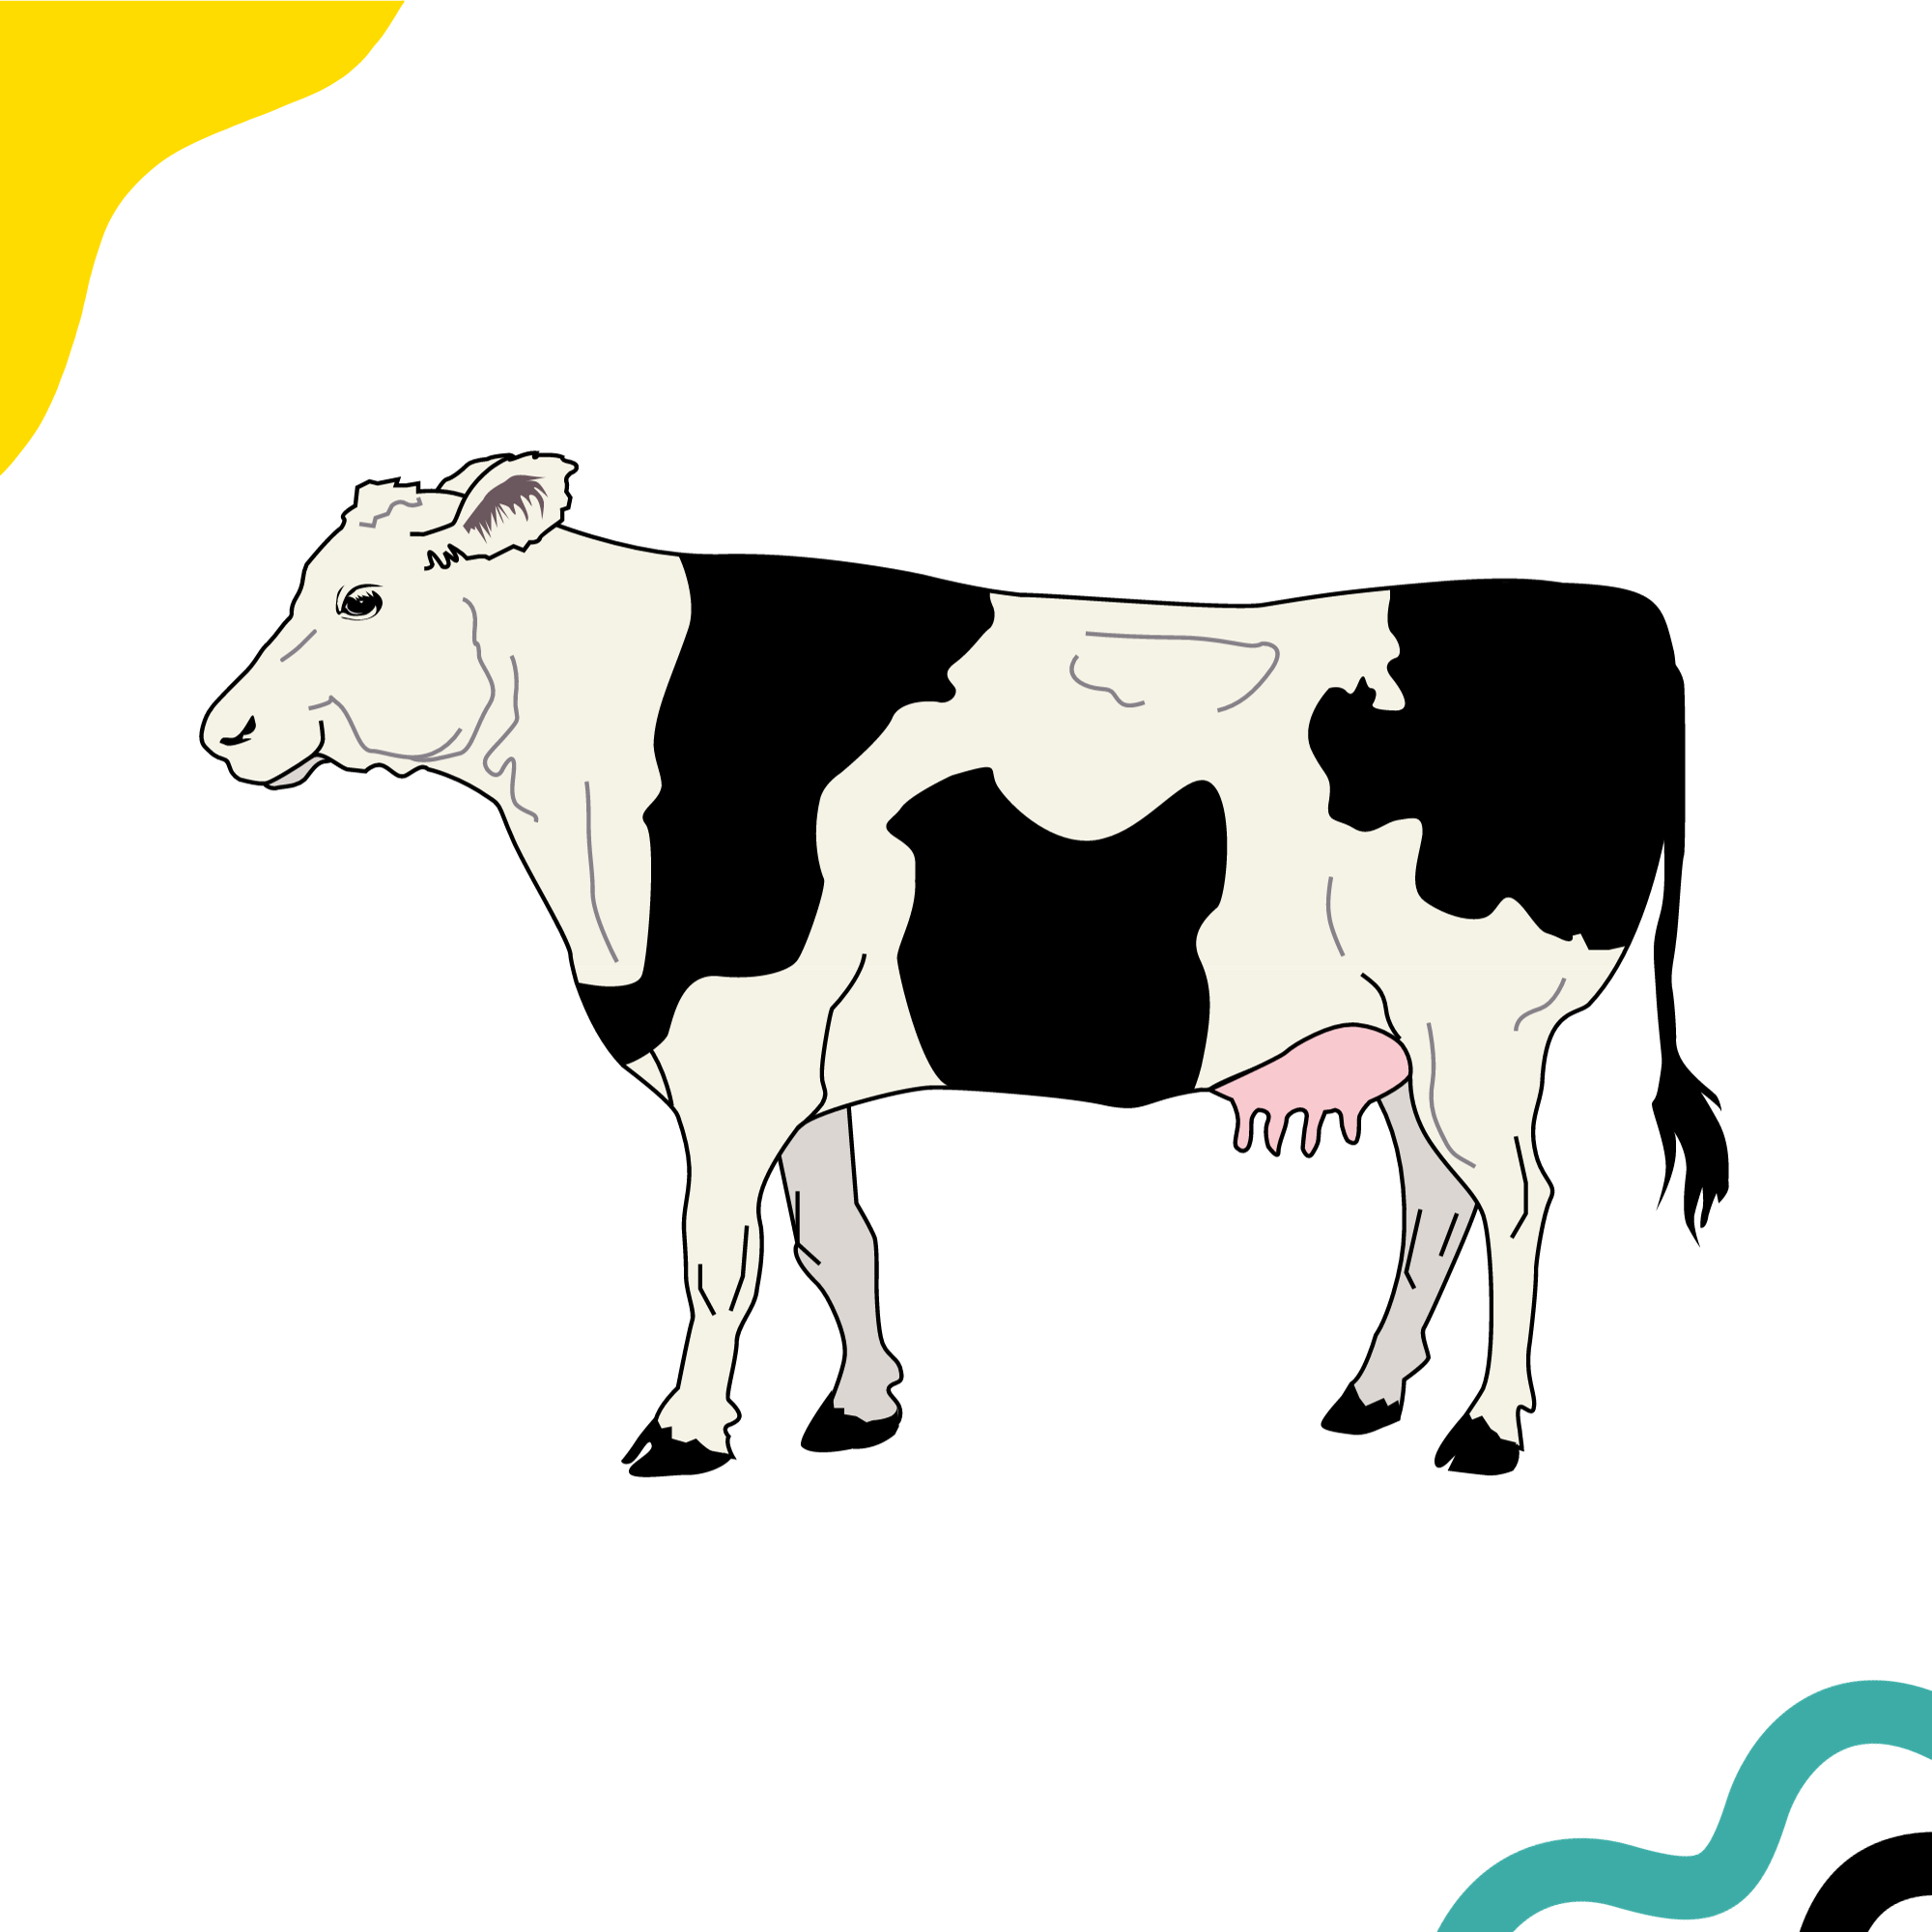 Visual demonstration of a cow